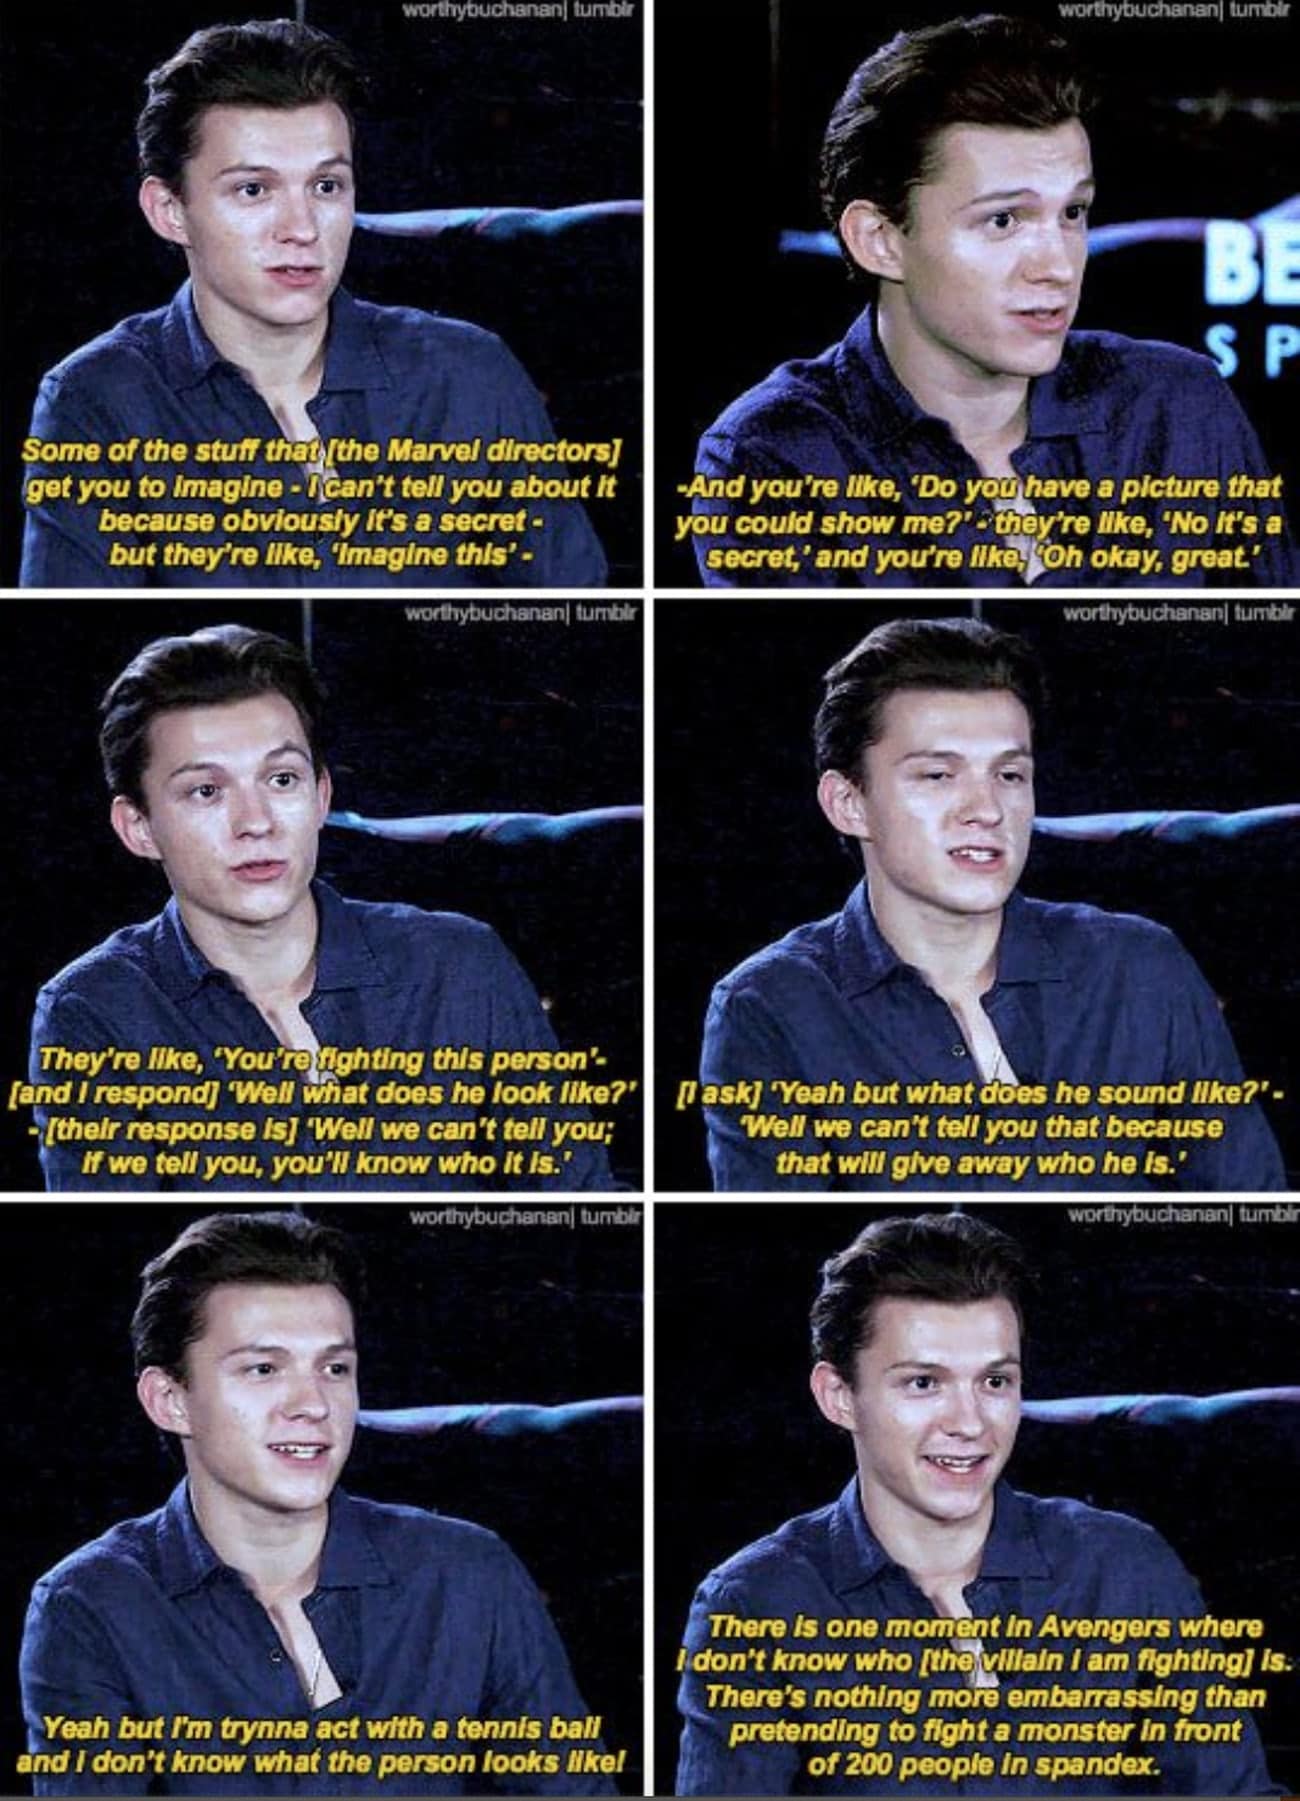  Tom Holland Interviews Proving He is "Real Life" Peter Parker